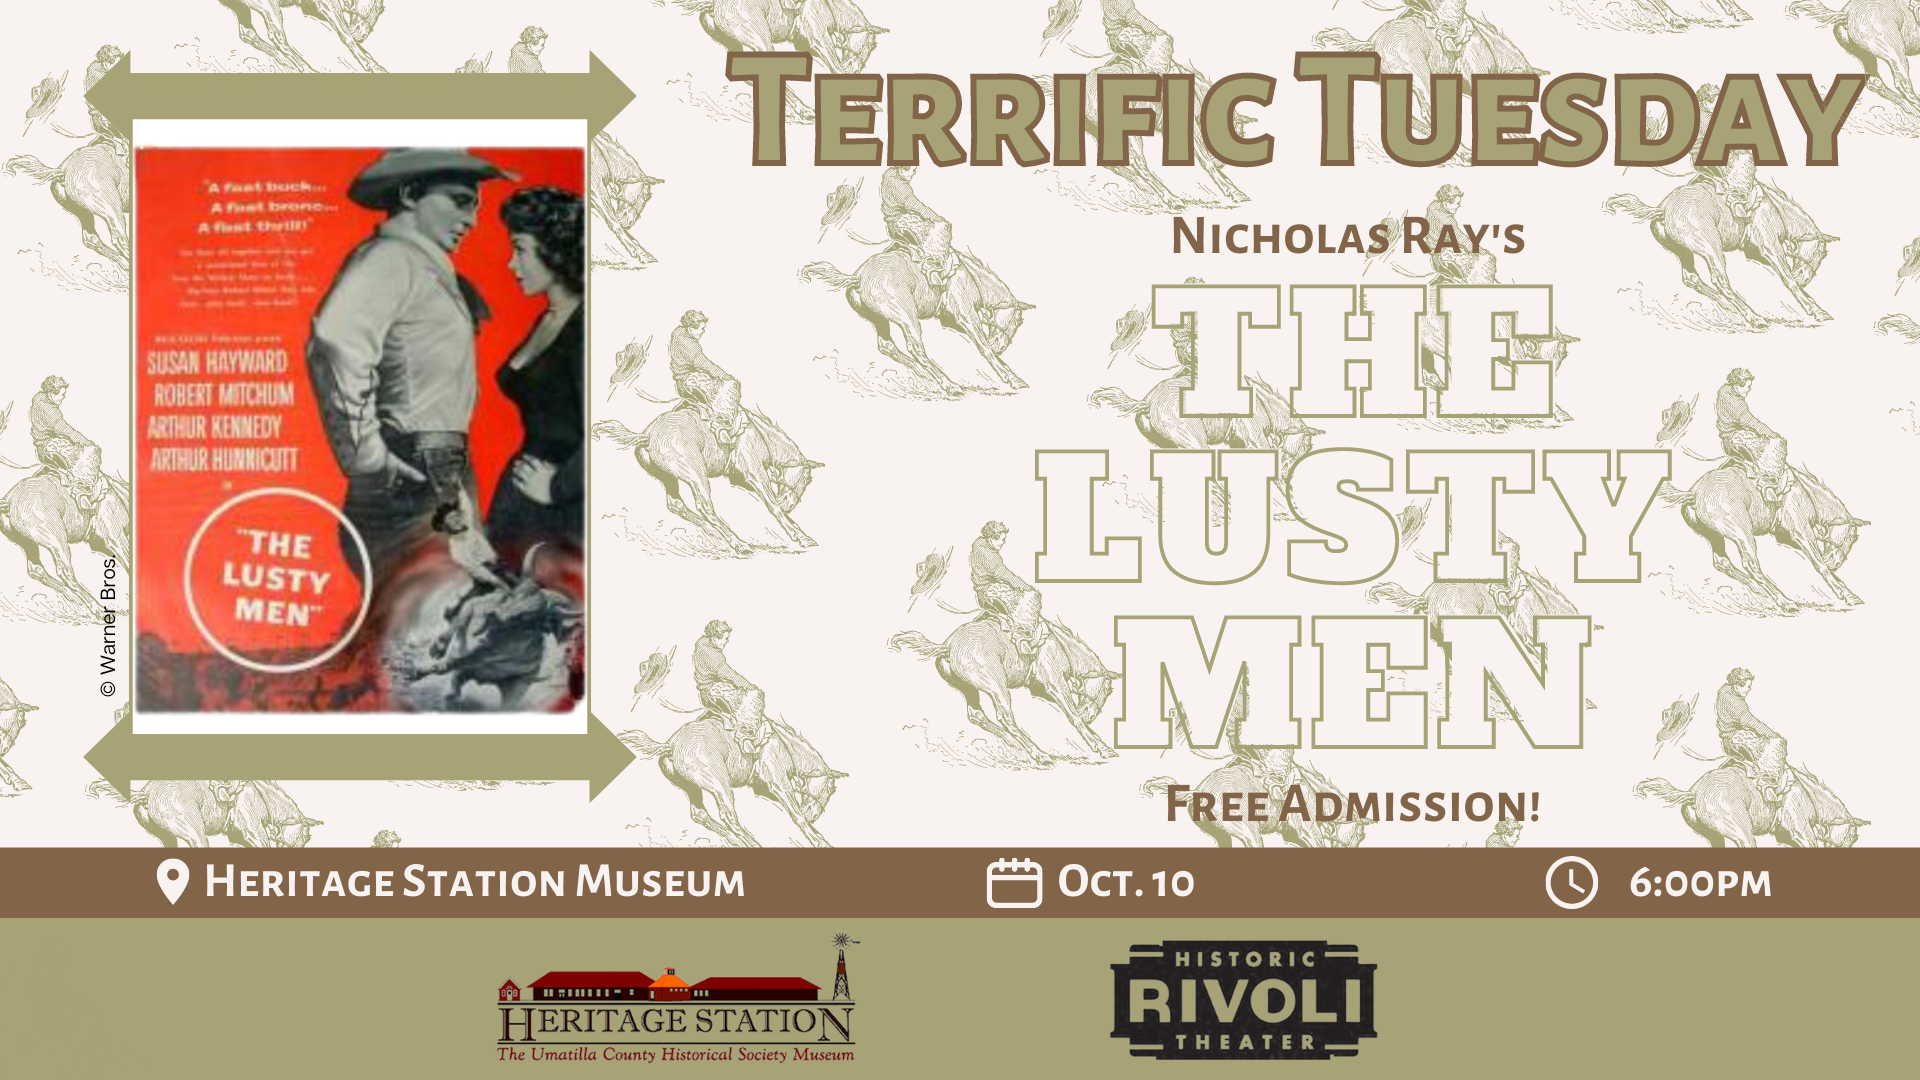 Text Reading: Terrific Tuesday: Nicholas Ray's The Lusty Men, Free Admission! Heritage Station Museum, Oct. 10, 6:00pm